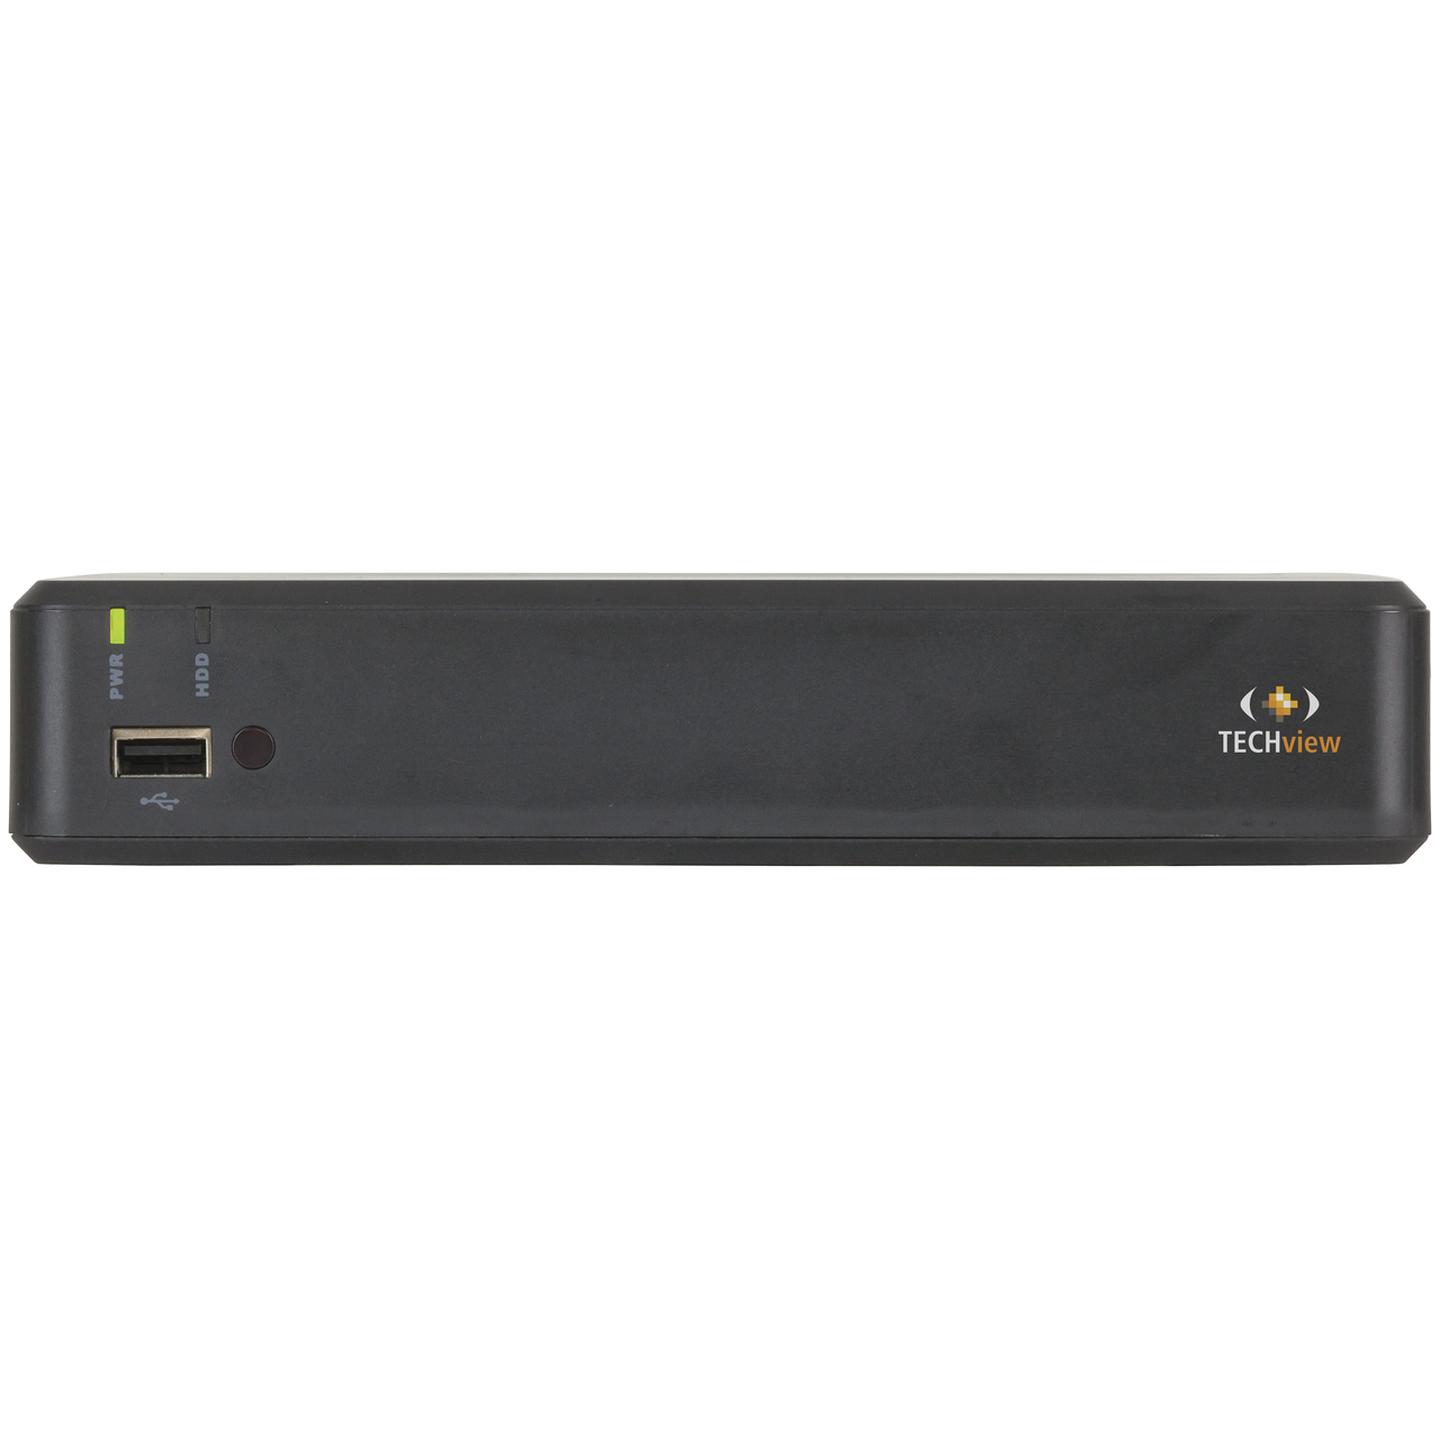 4 Channel NVR Kit with 4 x 720p IP Cameras